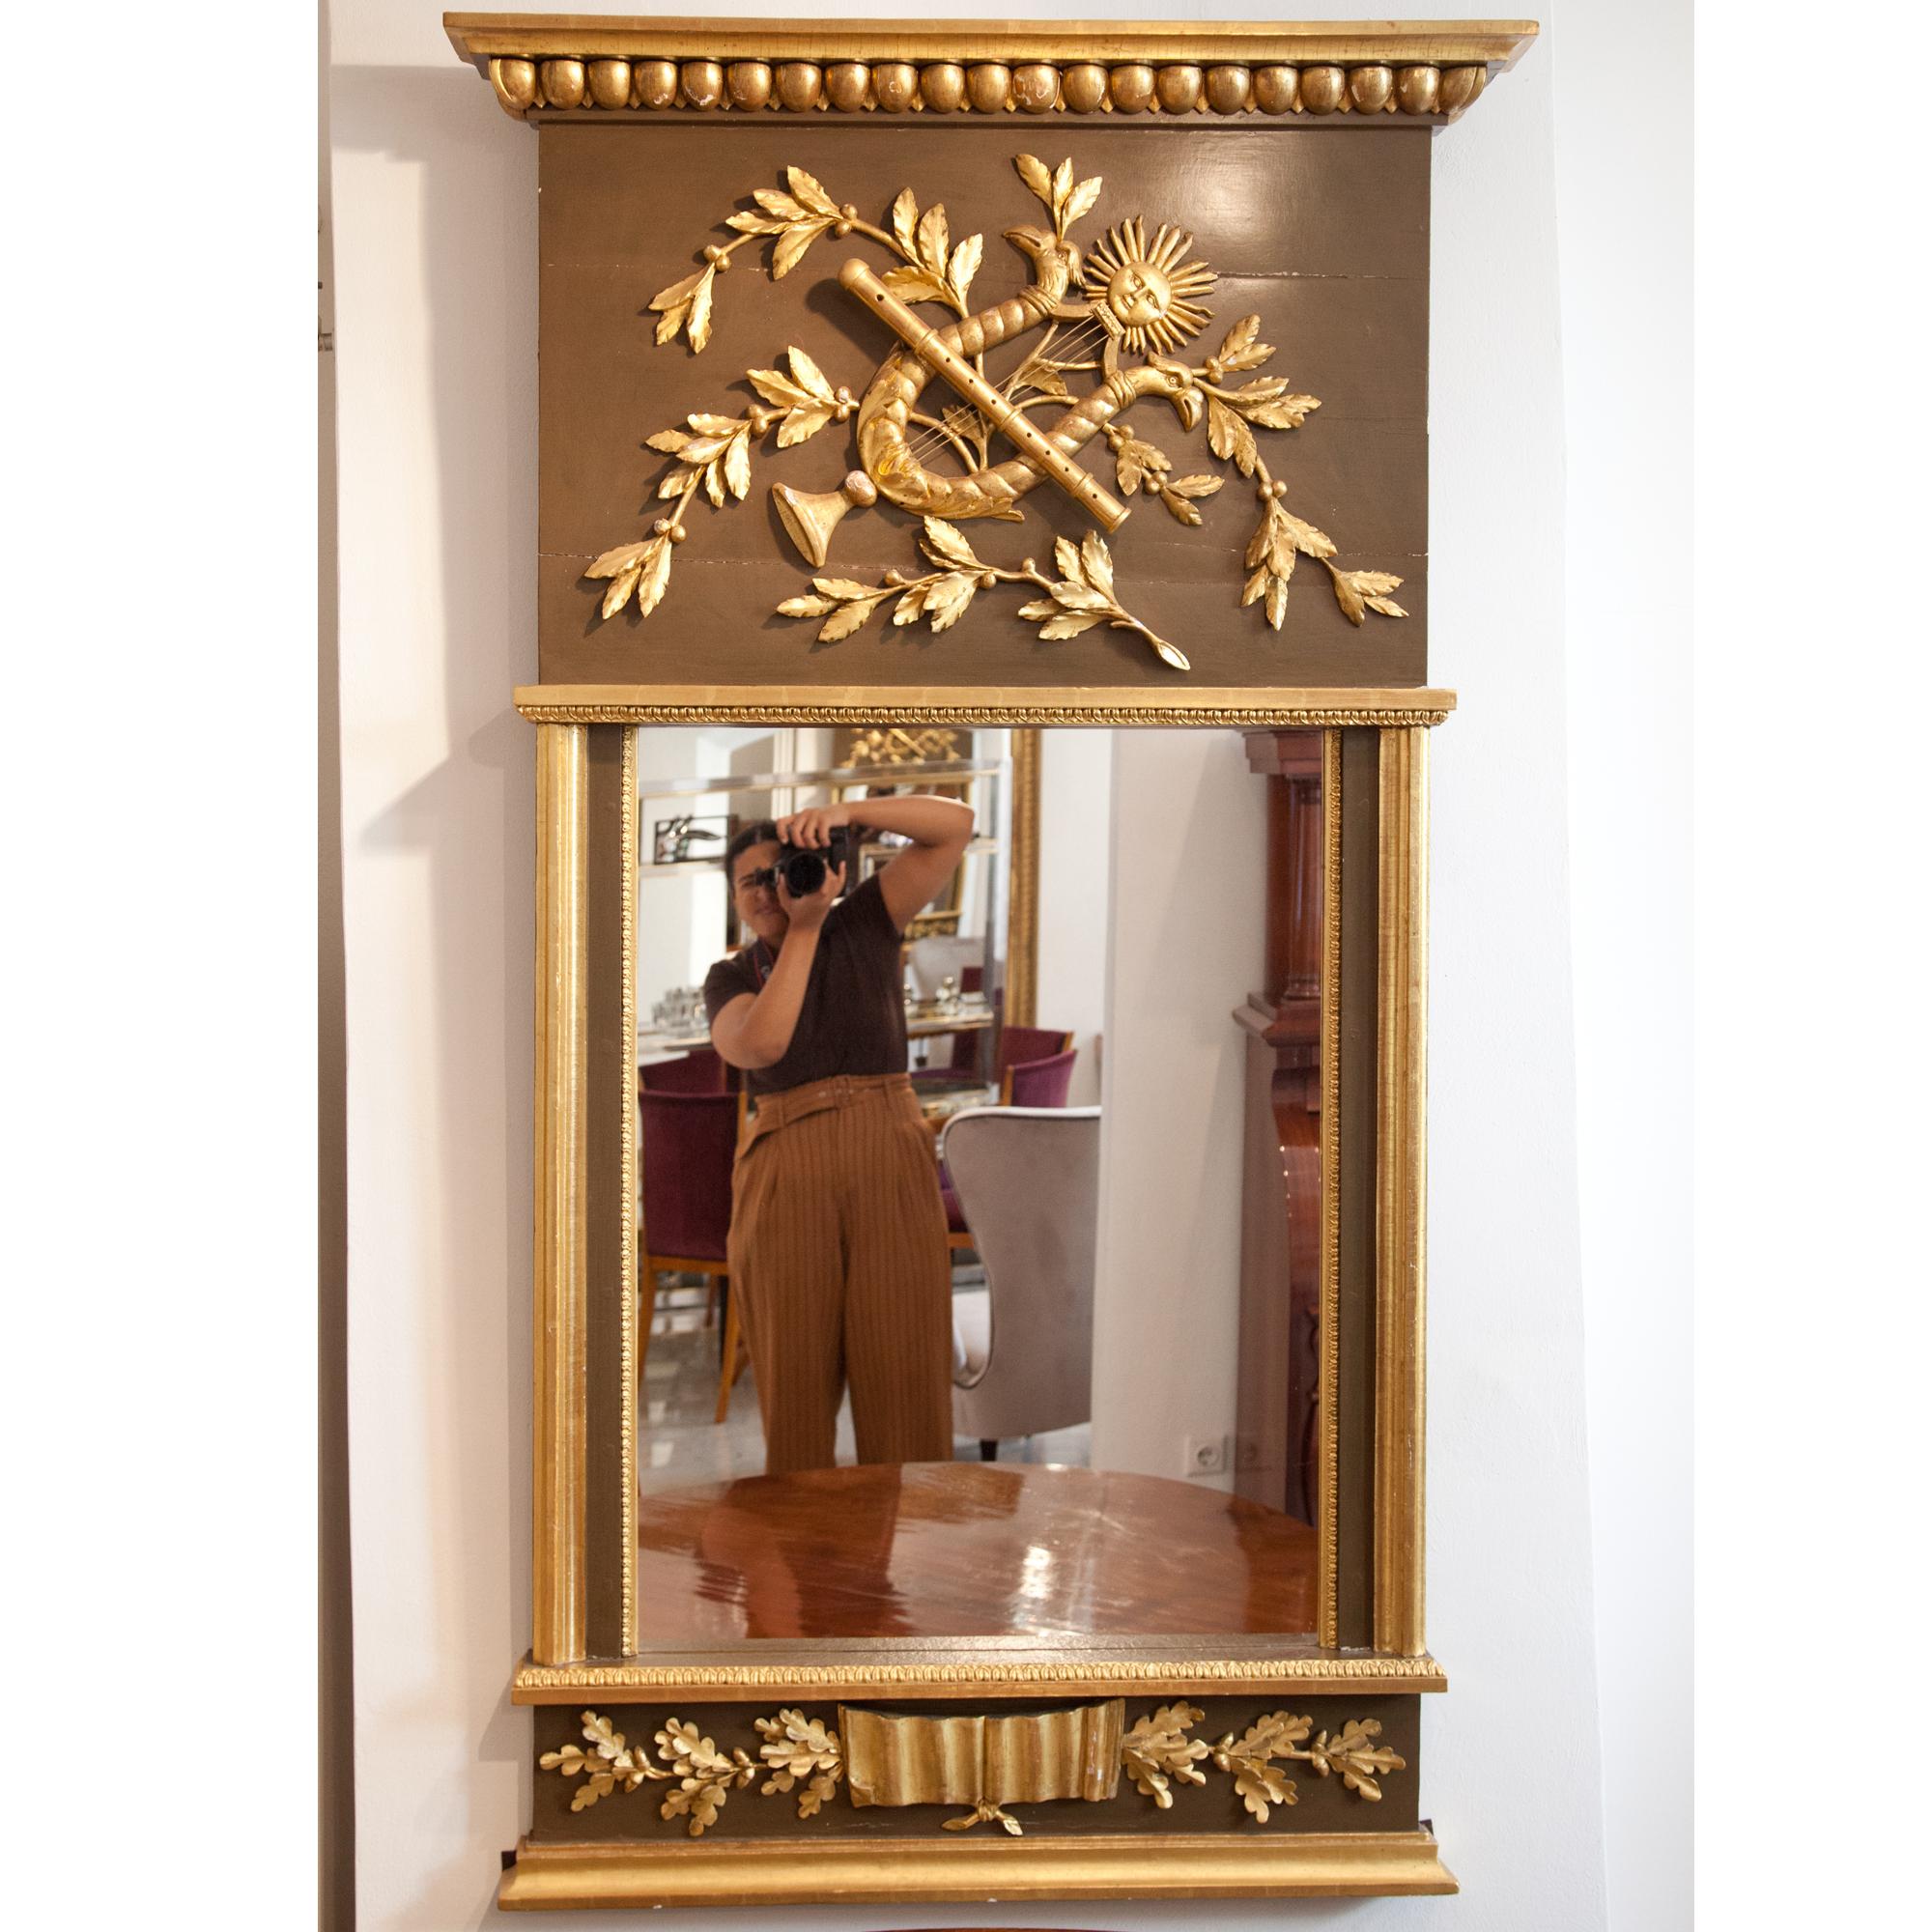 Wall mirror with applied sun ornament and decorations in the form of lyre, fruit and oak leaf decorations and a kymation frieze at the top.